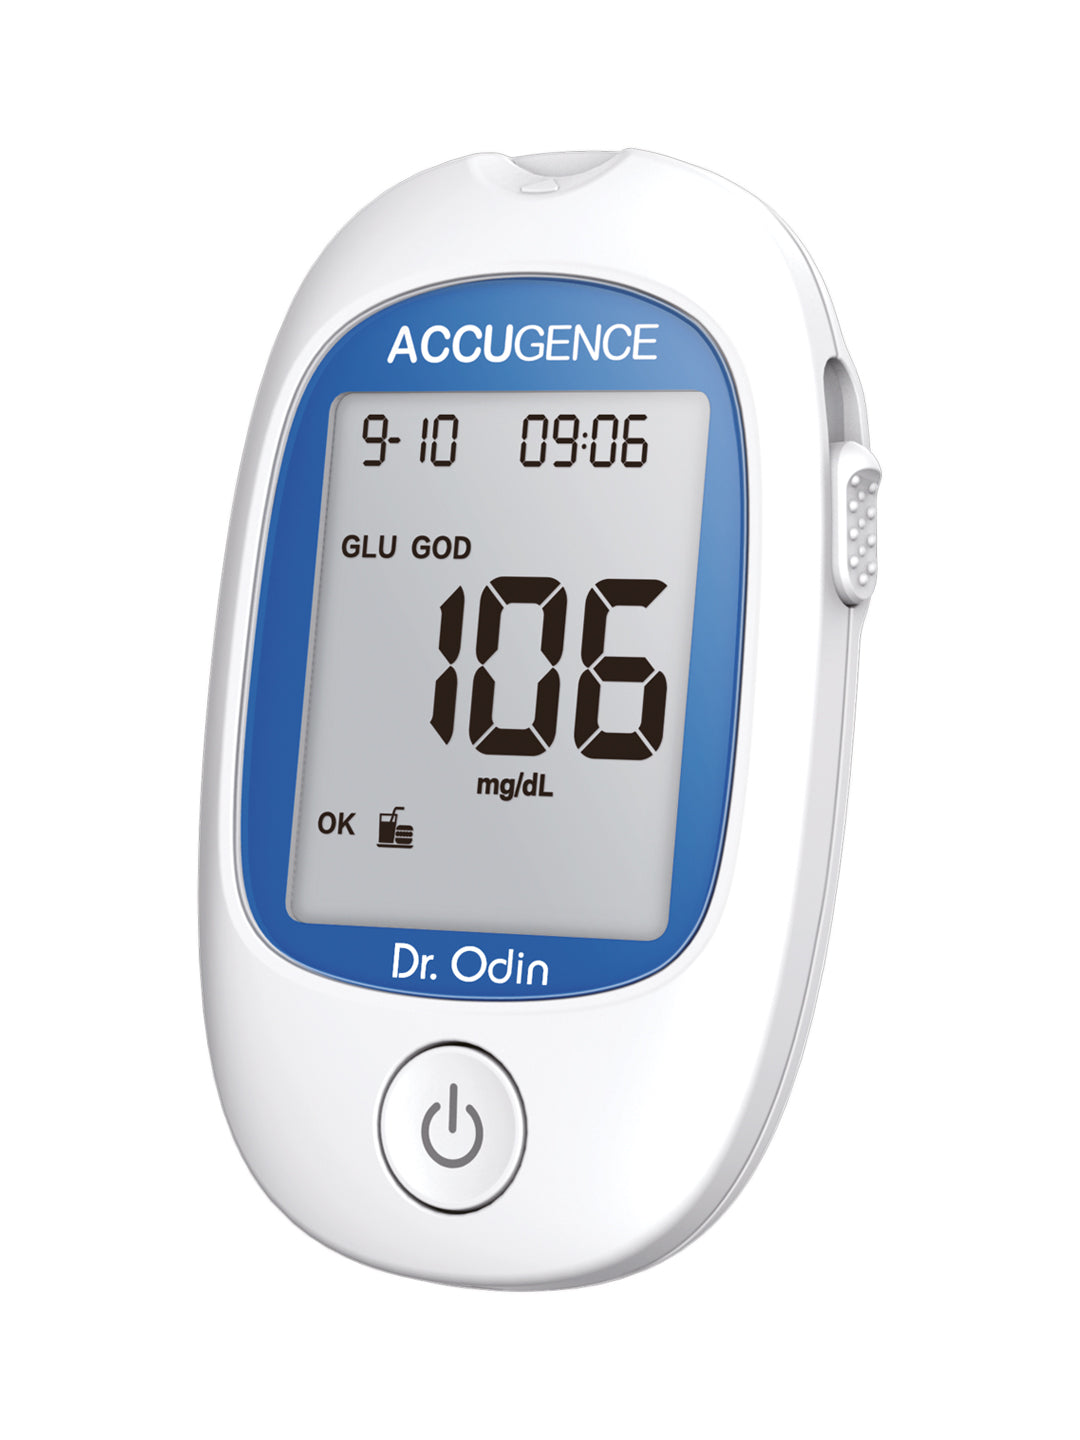 Accugence White Meter Only